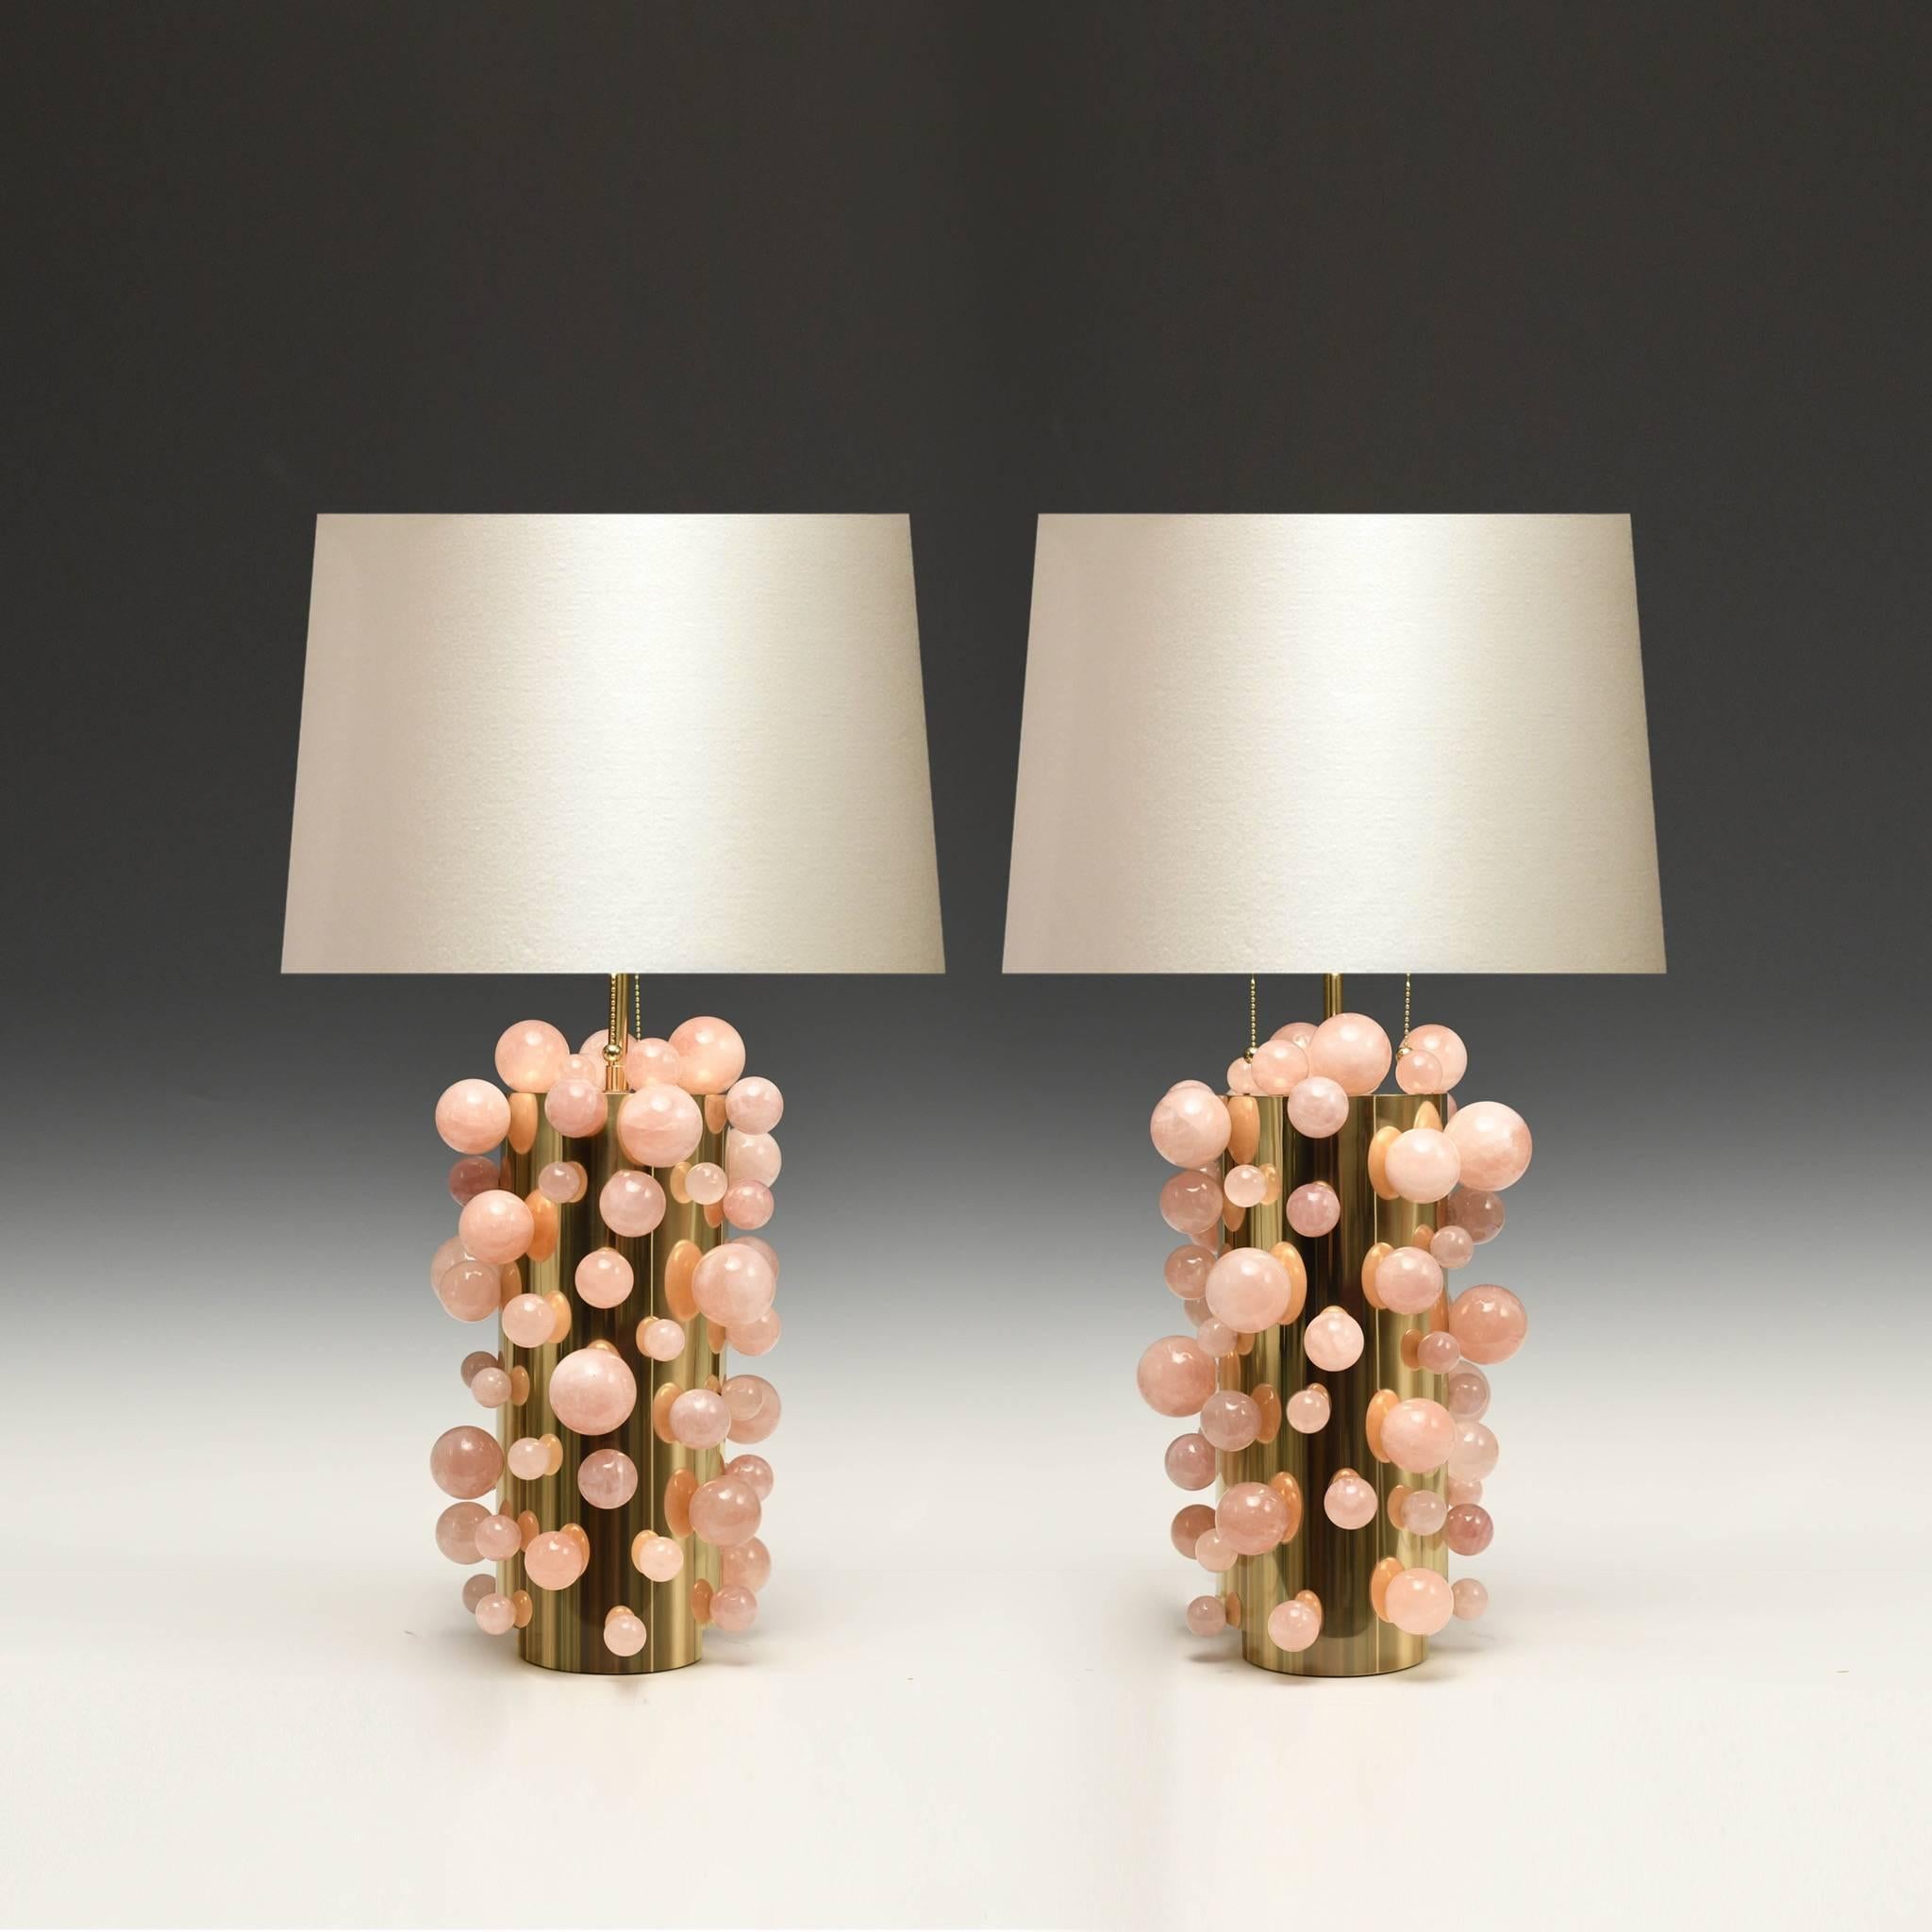 Pair of rose rock crystal bubble lamps with polish brass finish, created by Phoenix Gallery, NYC.
To the top of the rock crystal: 13.5 in/H
The lampshade is not included.